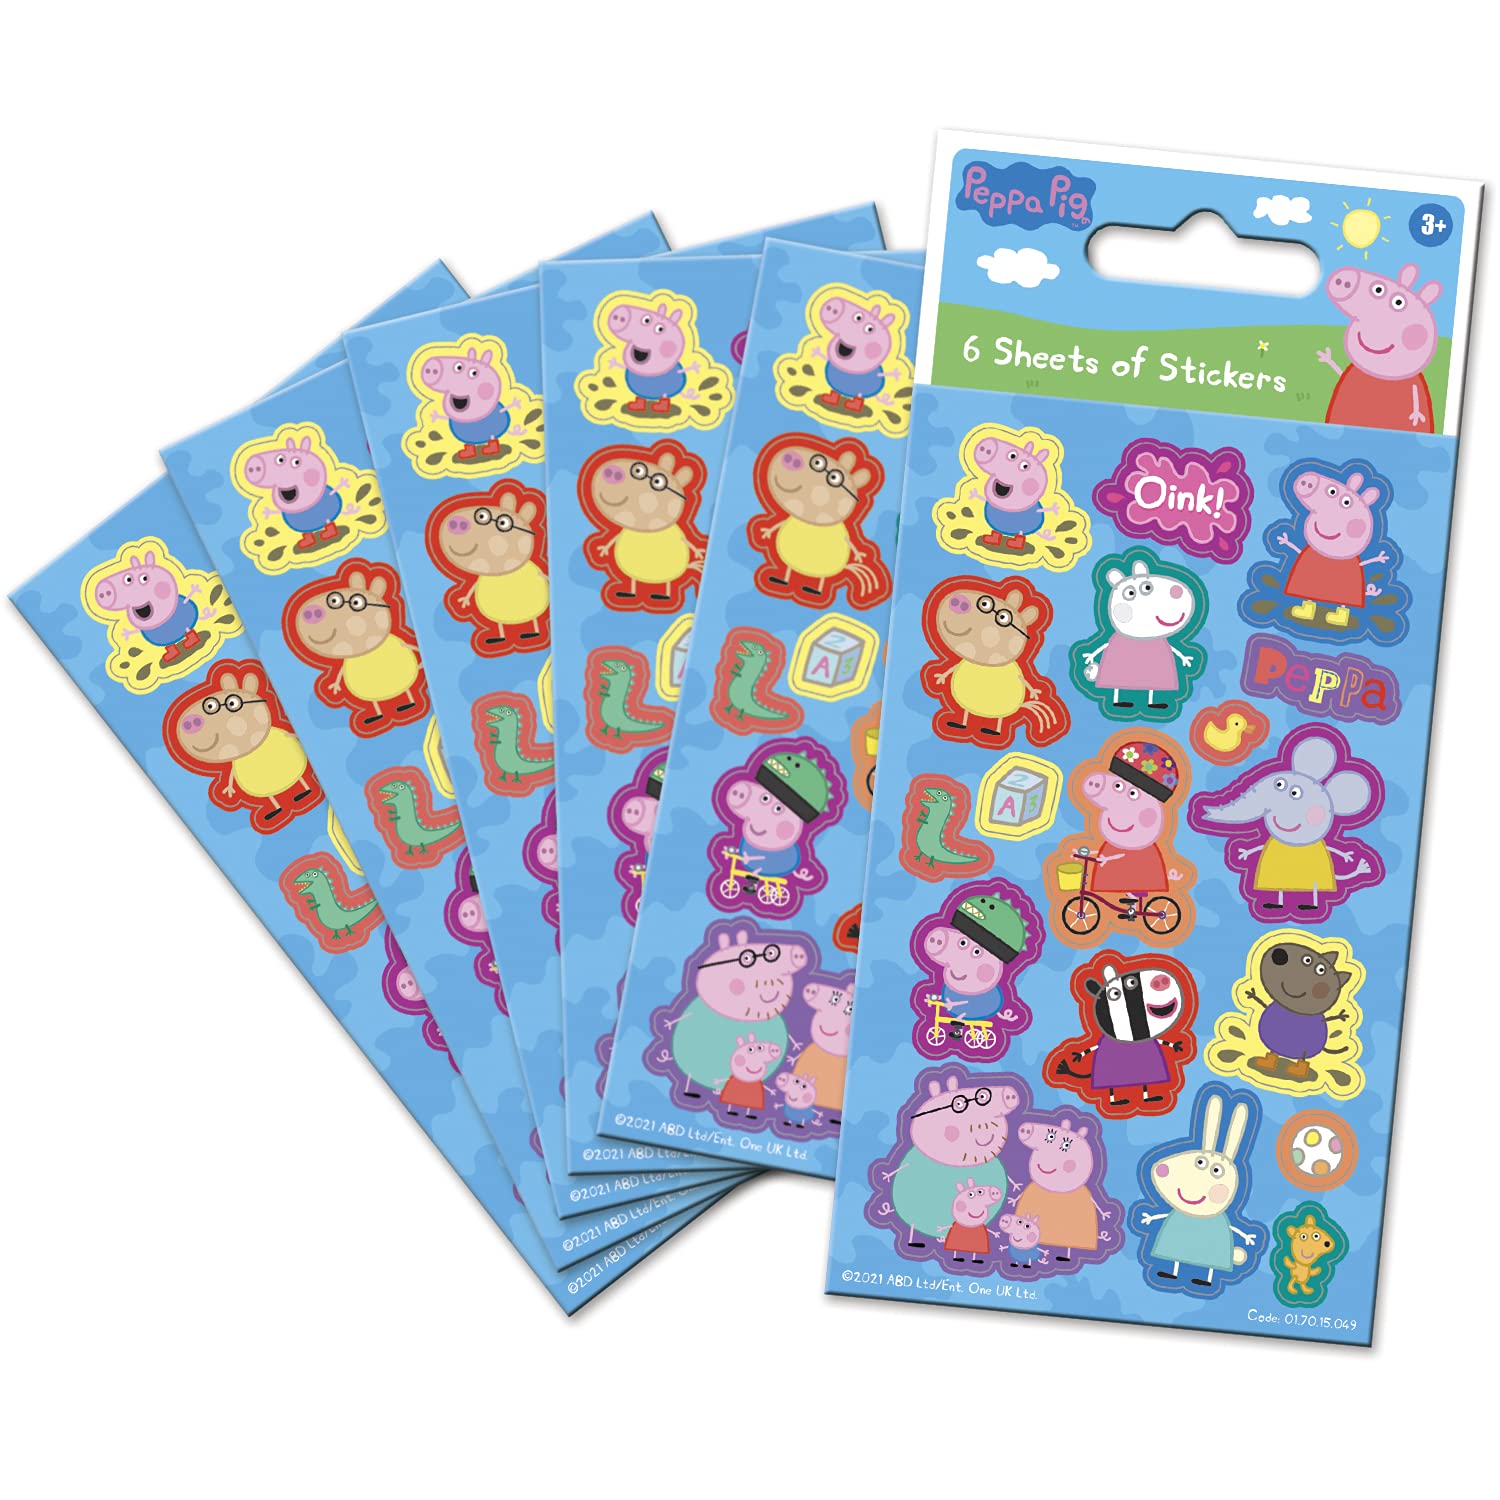 Paper Projects 01.70.06.152 Peppa Pig Blue Sparkly Reusable Sticker Pack 19.5cm x 9.5cm